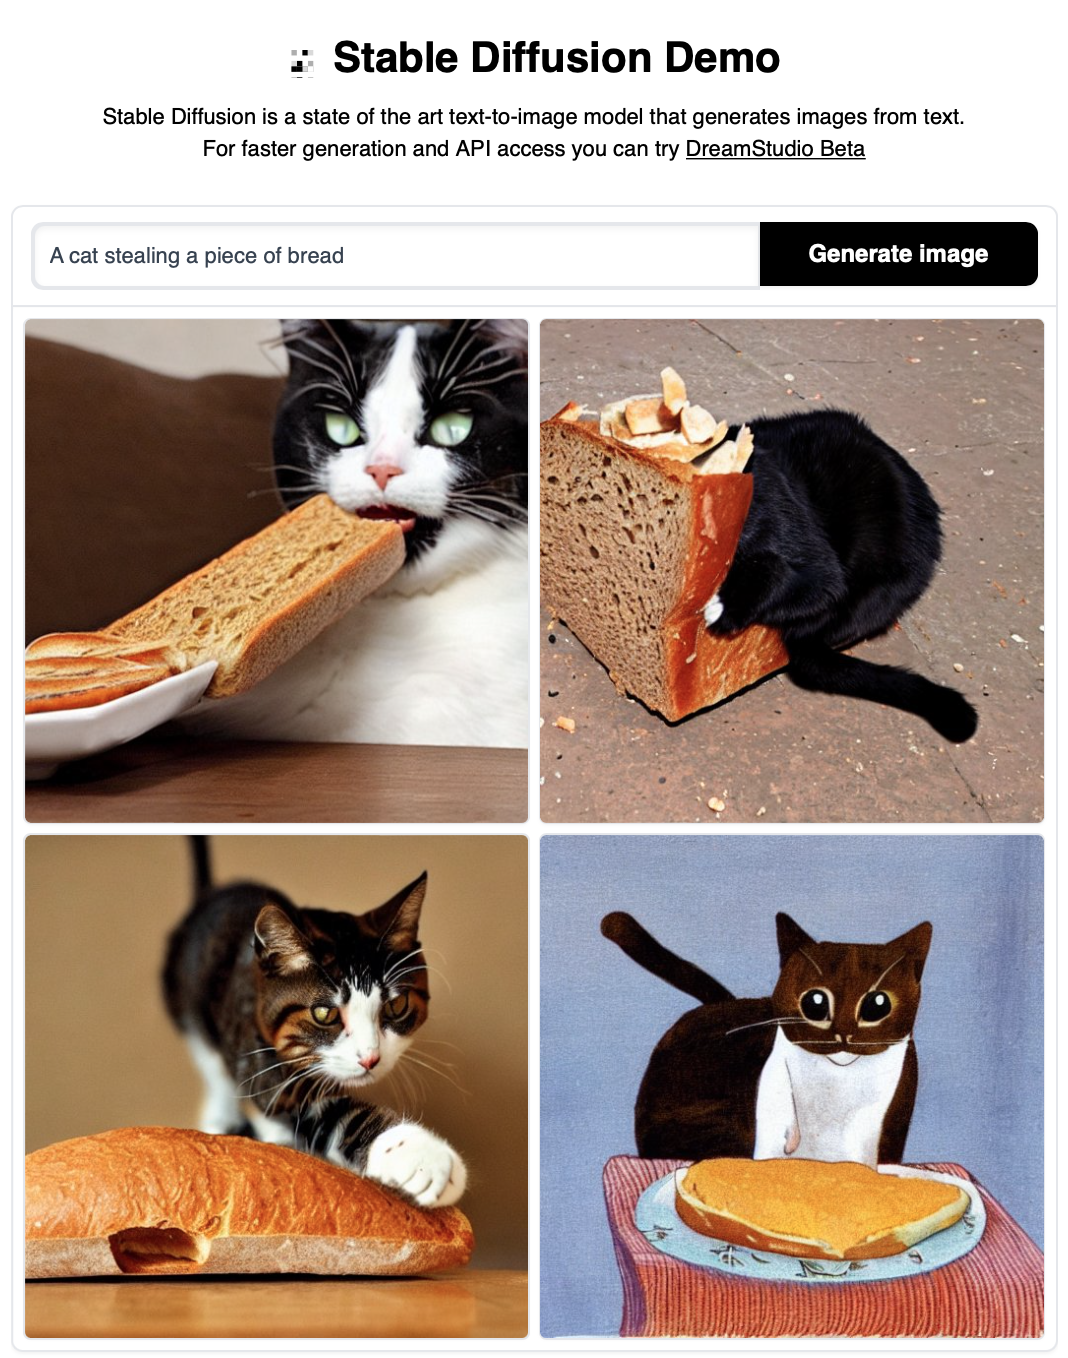 Stable Diffusion Demo output for the prompt 'A cat stealing a piece of bread.' Three images are in a photorealistic style, showing a cat with bread in its mouth, a cat touching bread with its paw, and a cat in a loaf of bread. The last image is in a painted style, showing a cat looking at a piece of bread covered in marmalade.